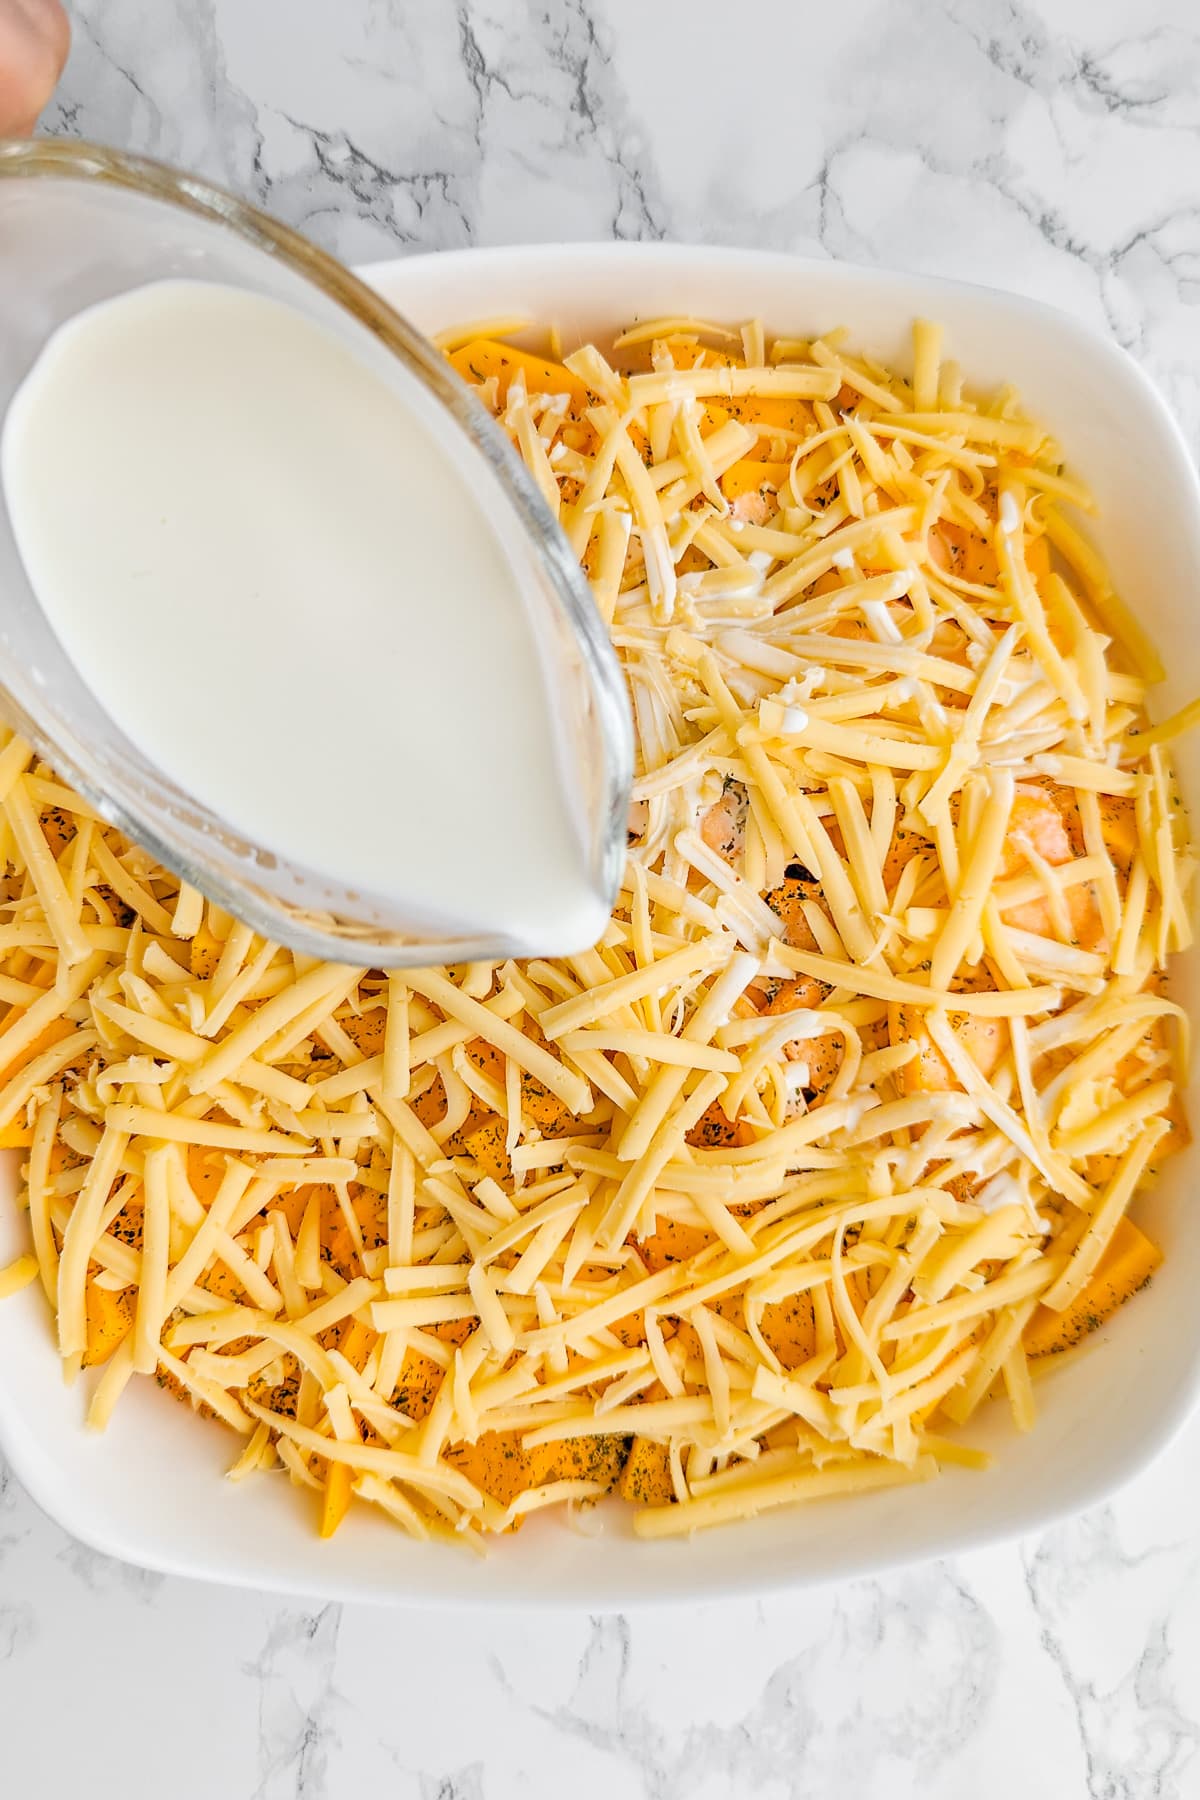 Pouring cream over grated cheese and pumpkin slices in a white casserole.